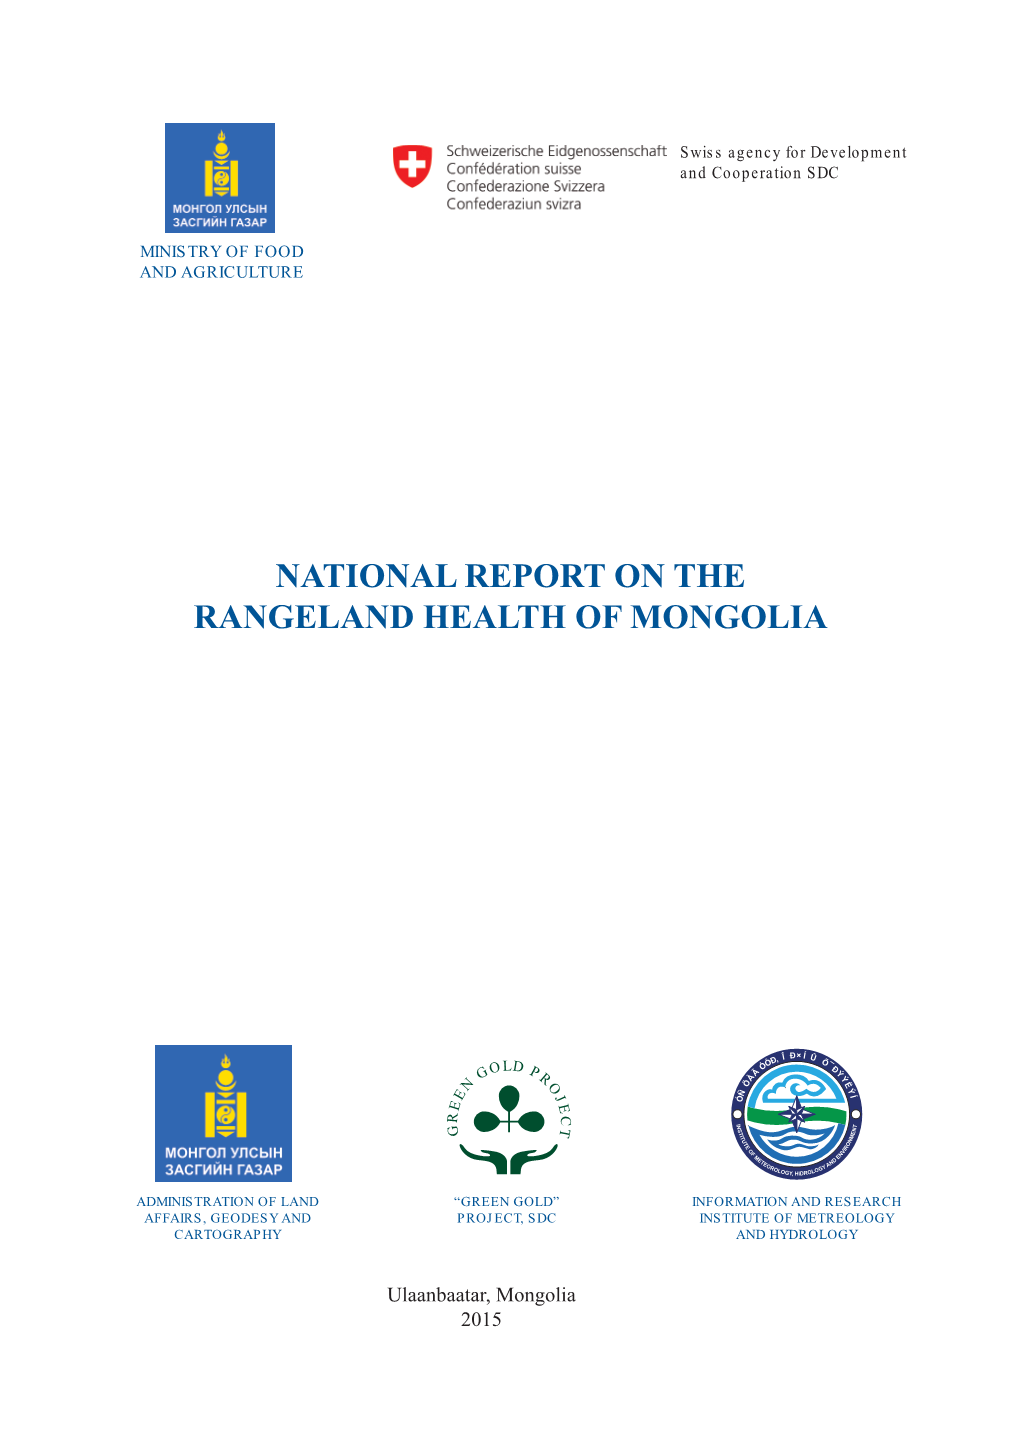 National Report on the Rangeland Health of Mongolia